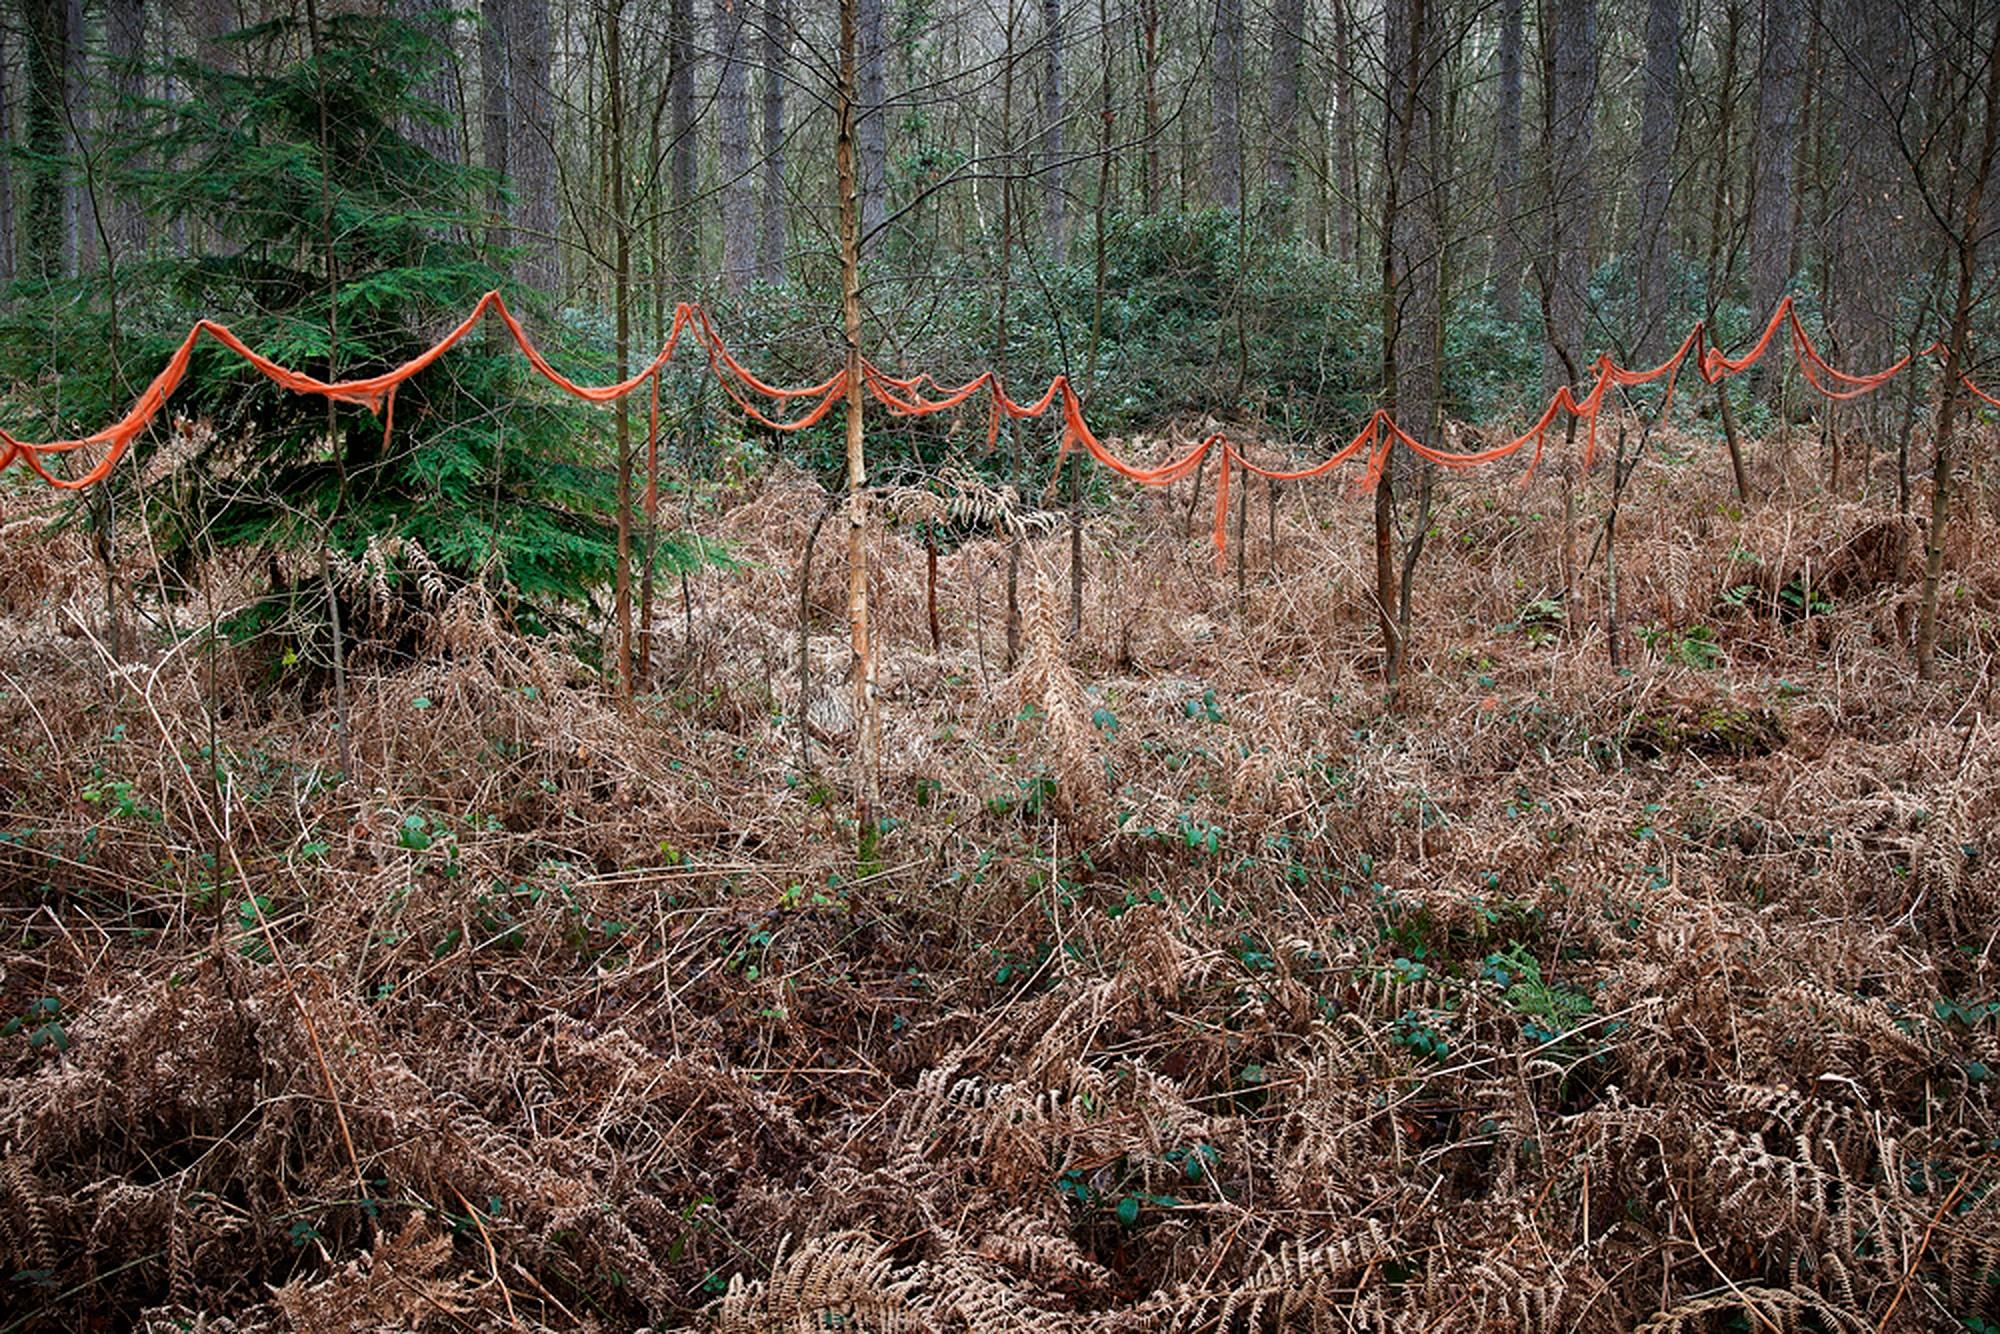 Ellie Davies Color Photograph - Knit One, Pearl One 6 (Contemporary British Photography, Forests, Wildlife)